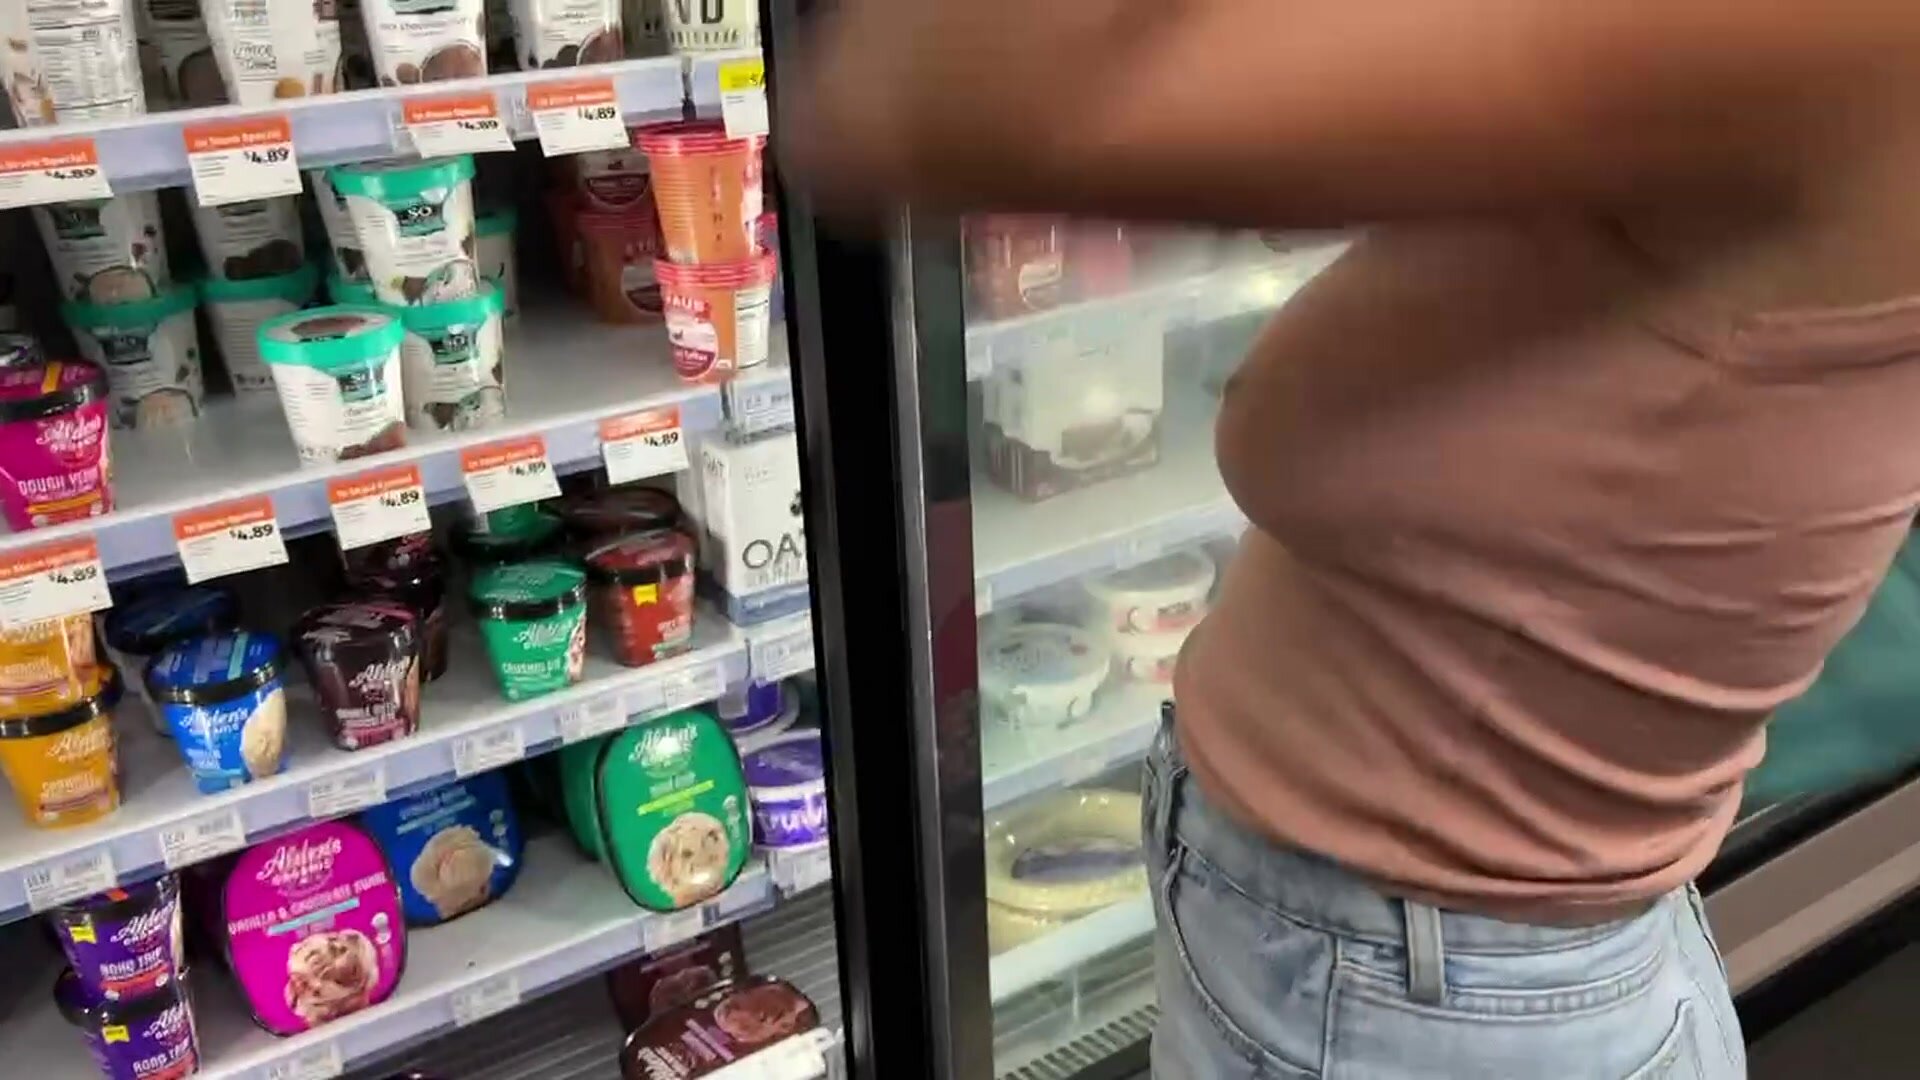 Picking out some ice cream